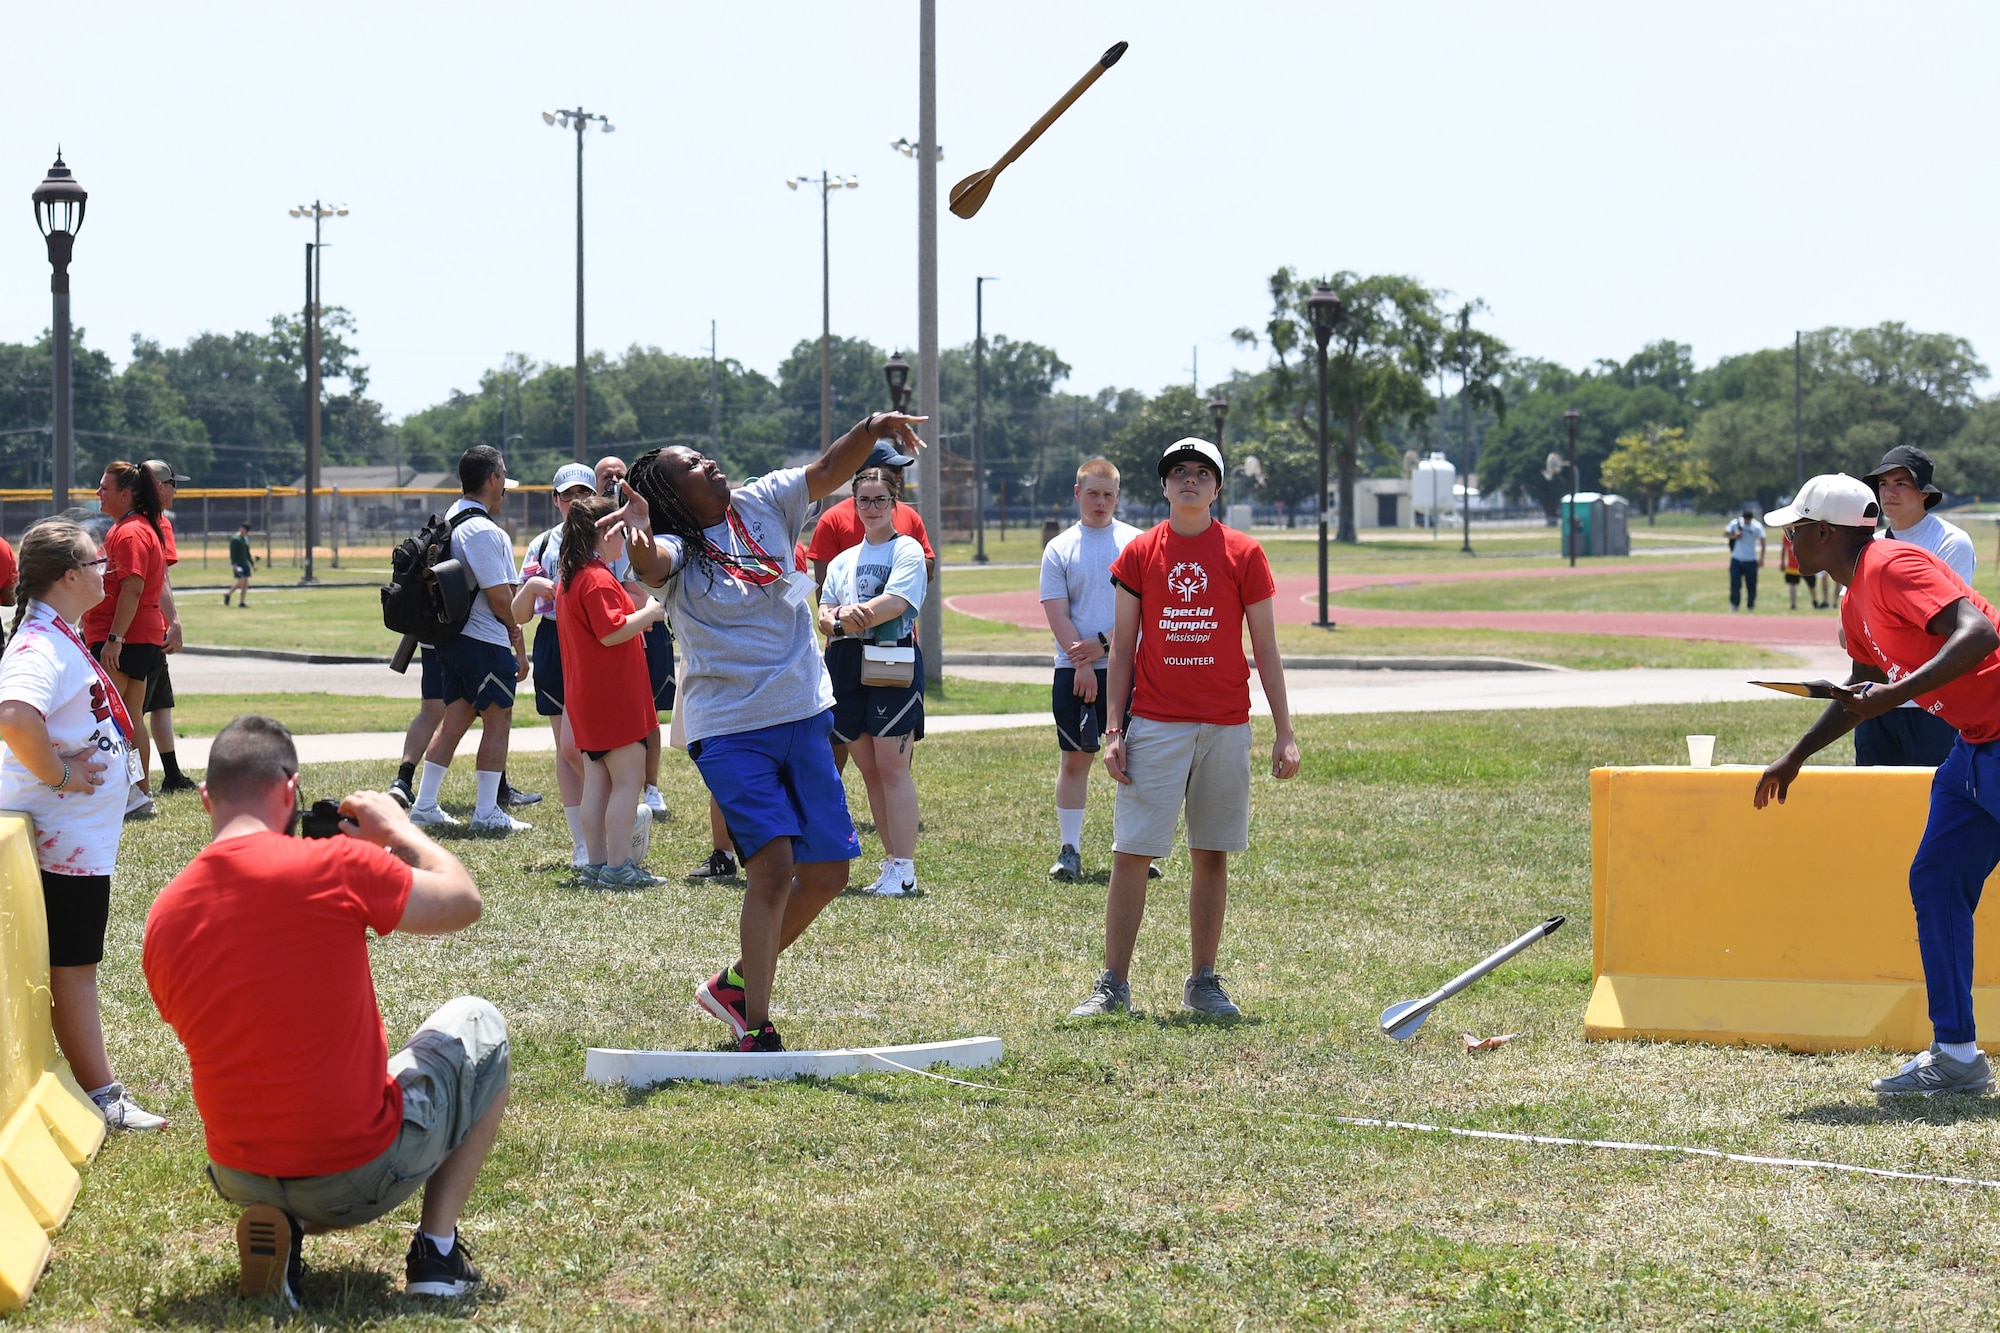 Tracy Herndell, Area 10 athlete, participates in mini javelin throw during the Special Olympics Mississippi Summer Games at Keesler Air Force Base, Miss., May 14, 2022. Over 600 athletes participated in the Summer Games. (U.S. Air Force photo by Kemberly Groue)